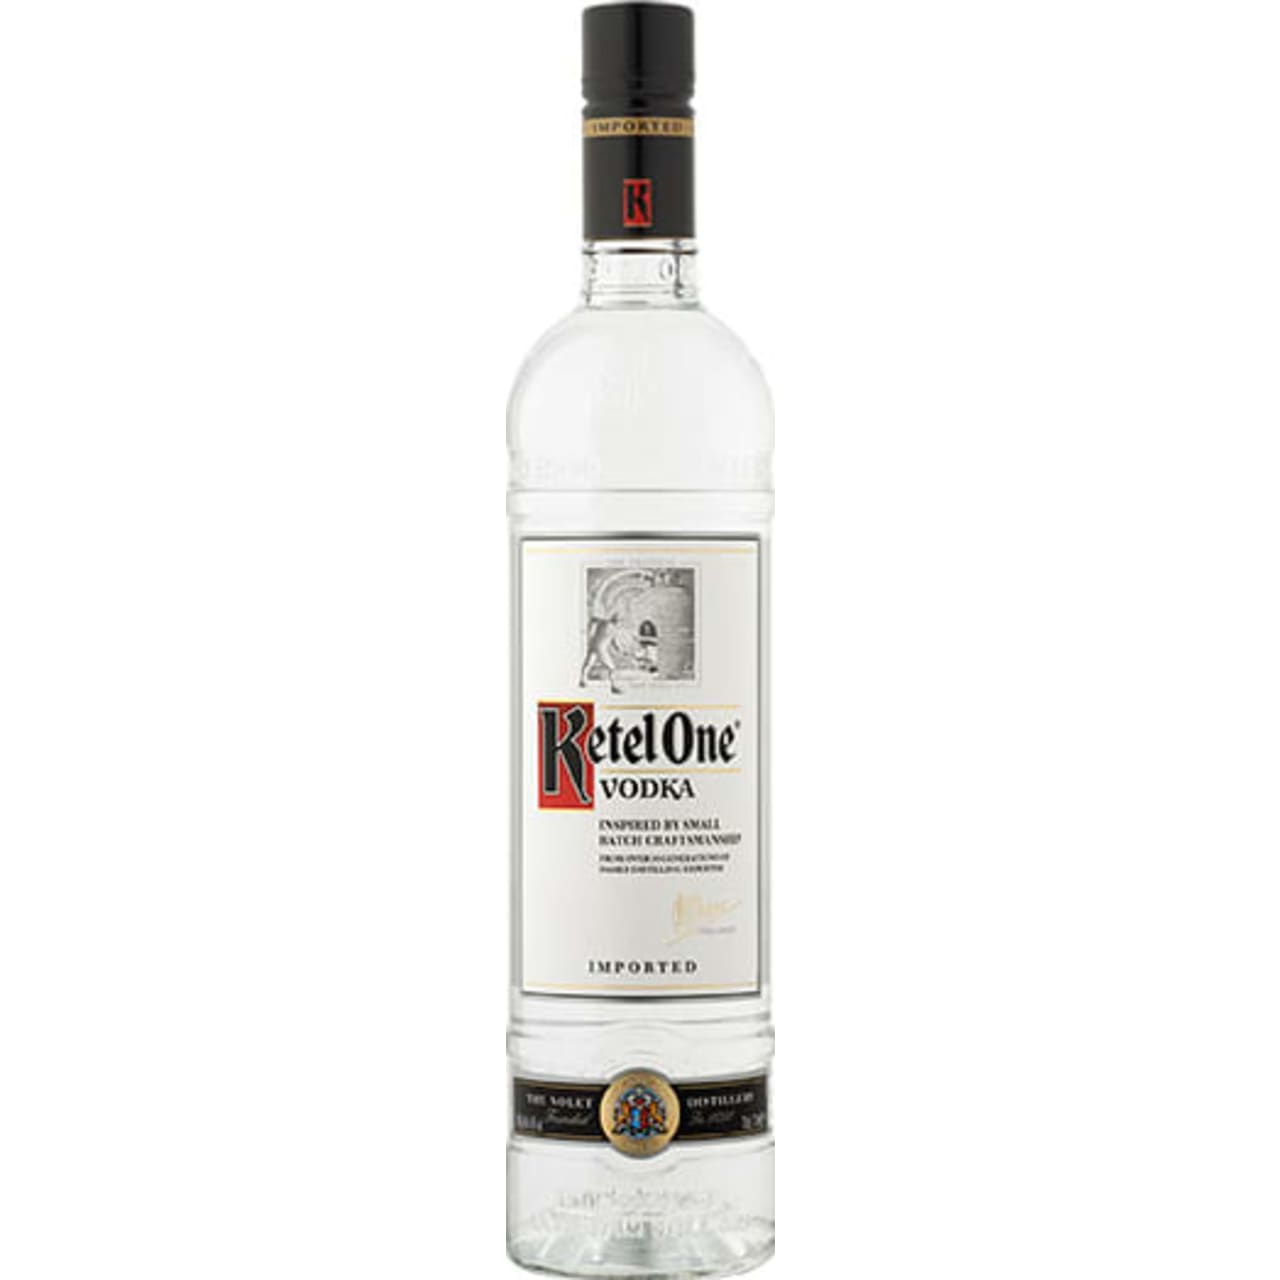 A premium vodka founded in Schiedam, Holland, in 1691. Ketel One is crafted using a combination of the most modern distilling techniques with traditional copper pot stills.